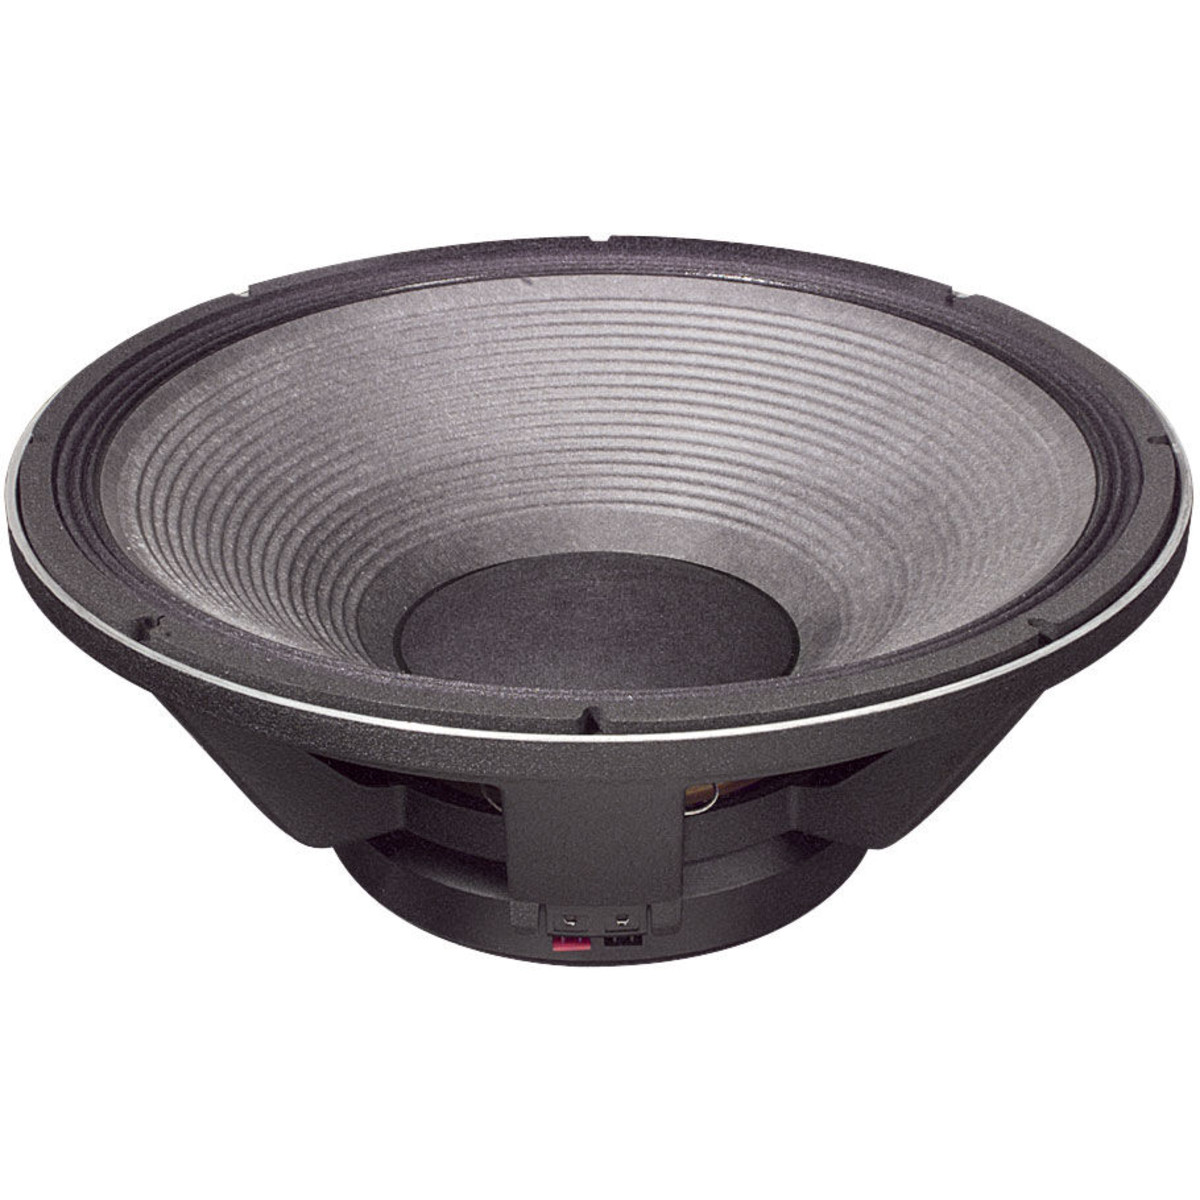 convenience beef shit JBL 18 inch sub driver 2242H - Strong Technical Services